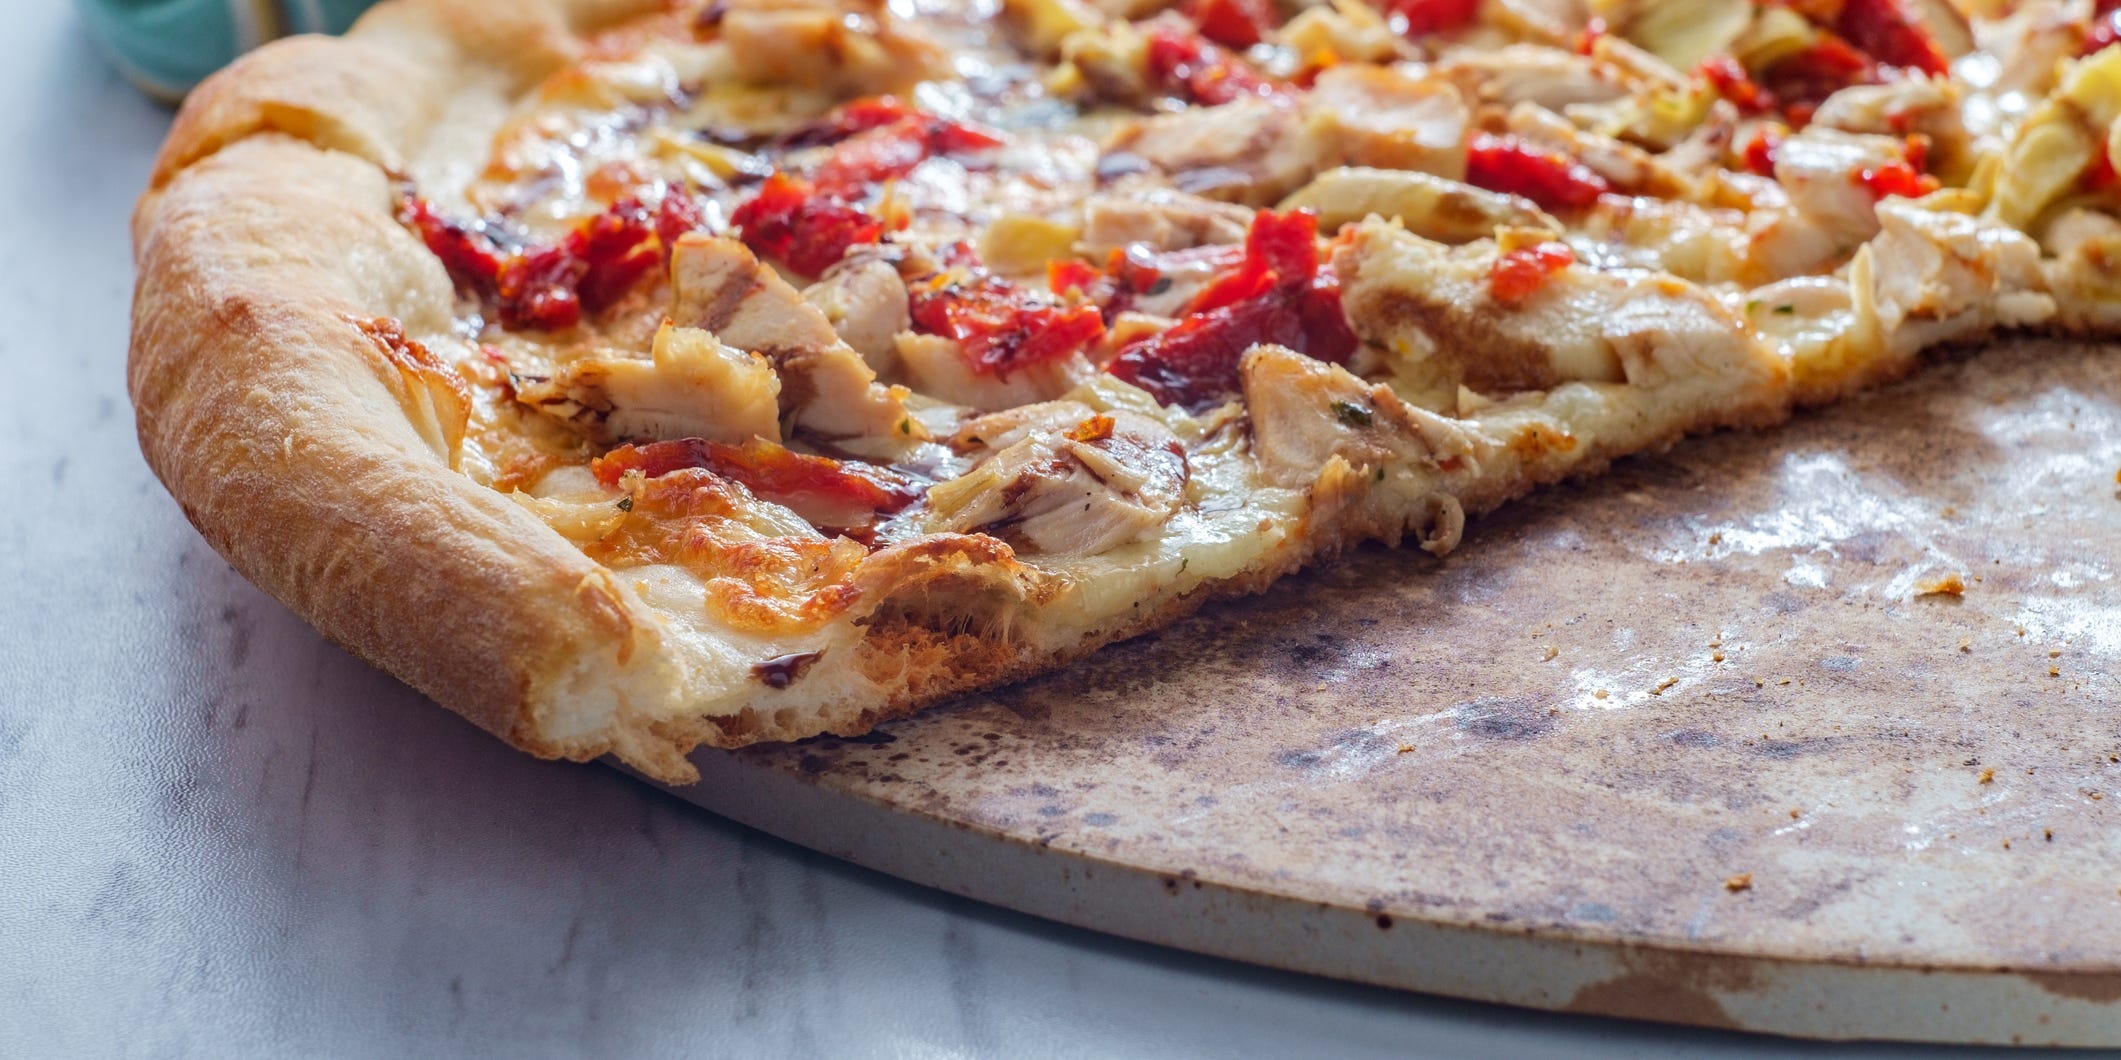 A homemade pizza topped with chicken and peppers with slices removed revealing a pizza stone underneath